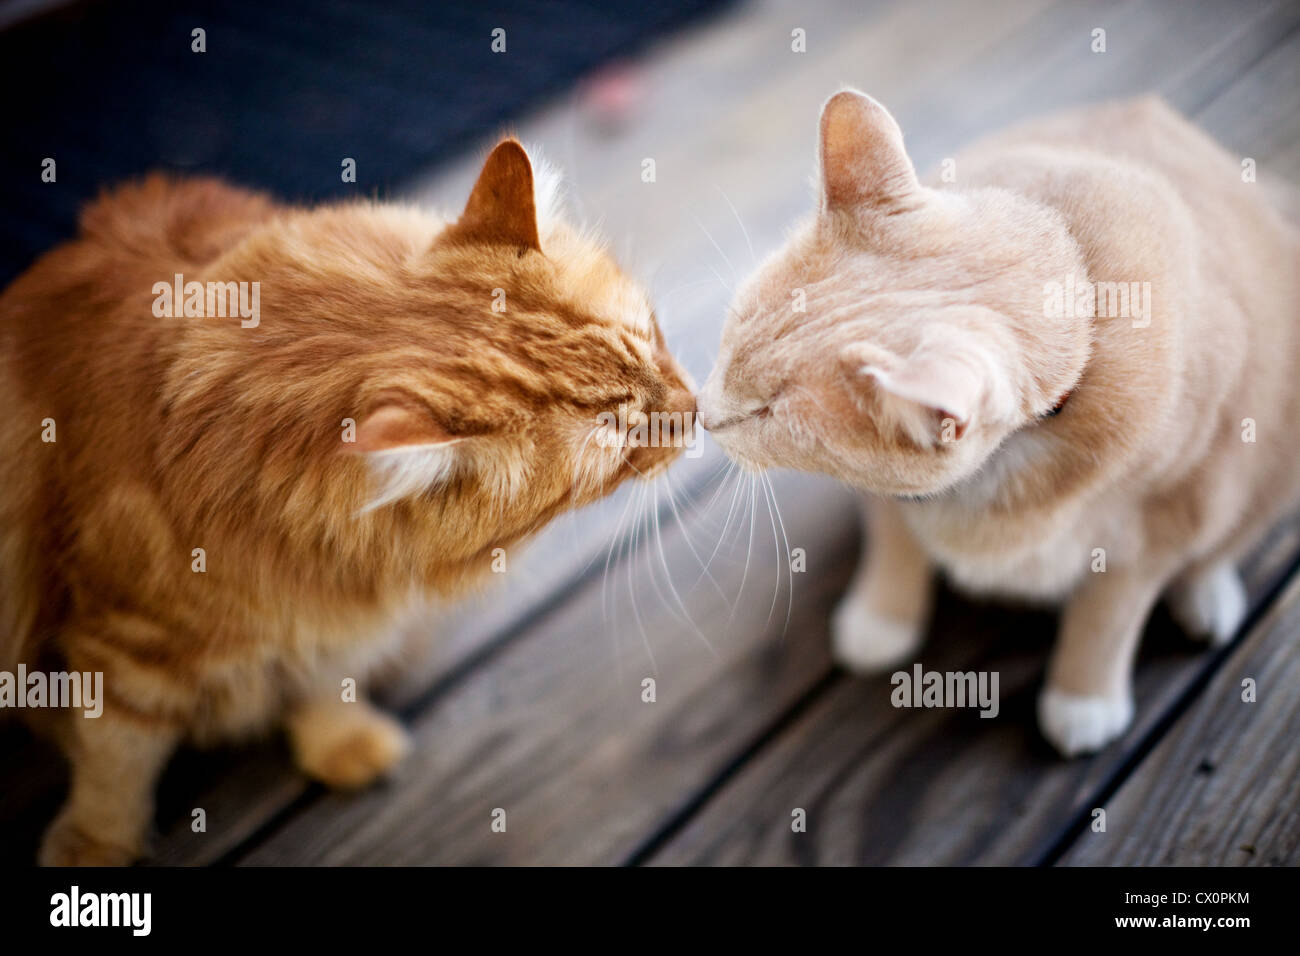 Overhead view of two cats touching noses Stock Photo